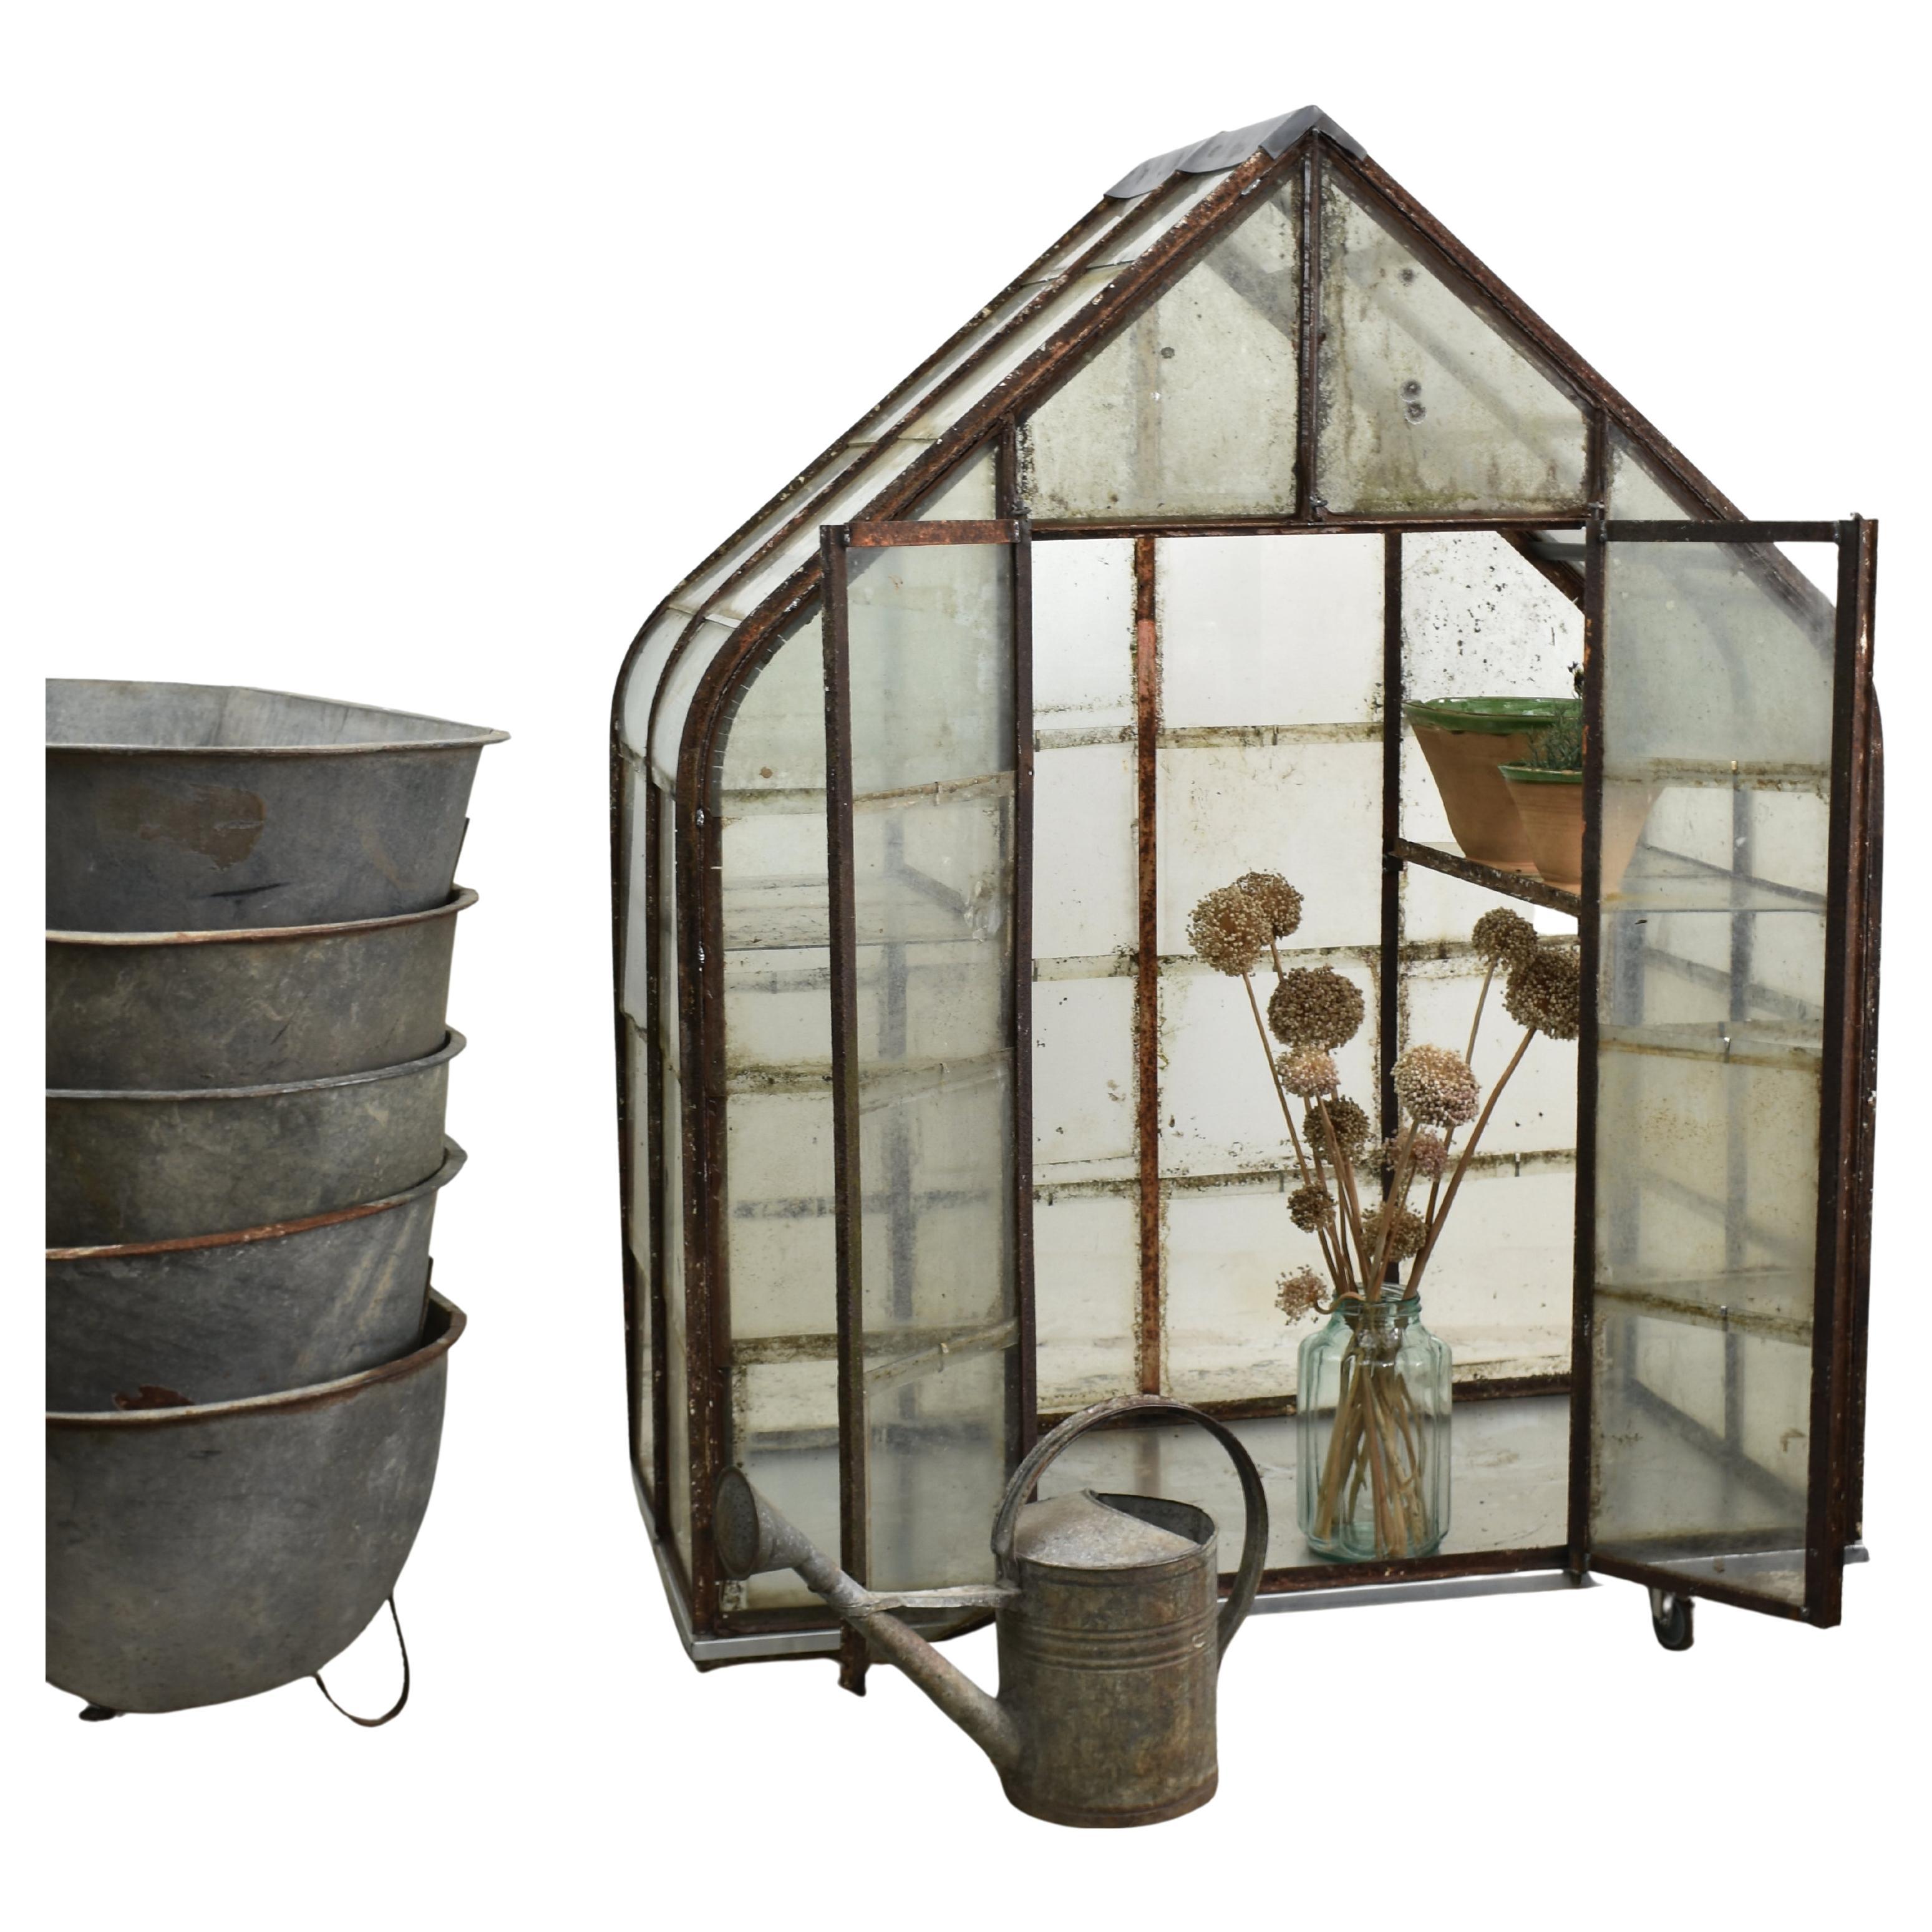 A unique antique metal greenhouse. The greenhouse has been constructed from an original grape greenhouse from Belgium, these larger greenhouses were dismantled and smaller ones made from the components. The glazing and metal frame is original and